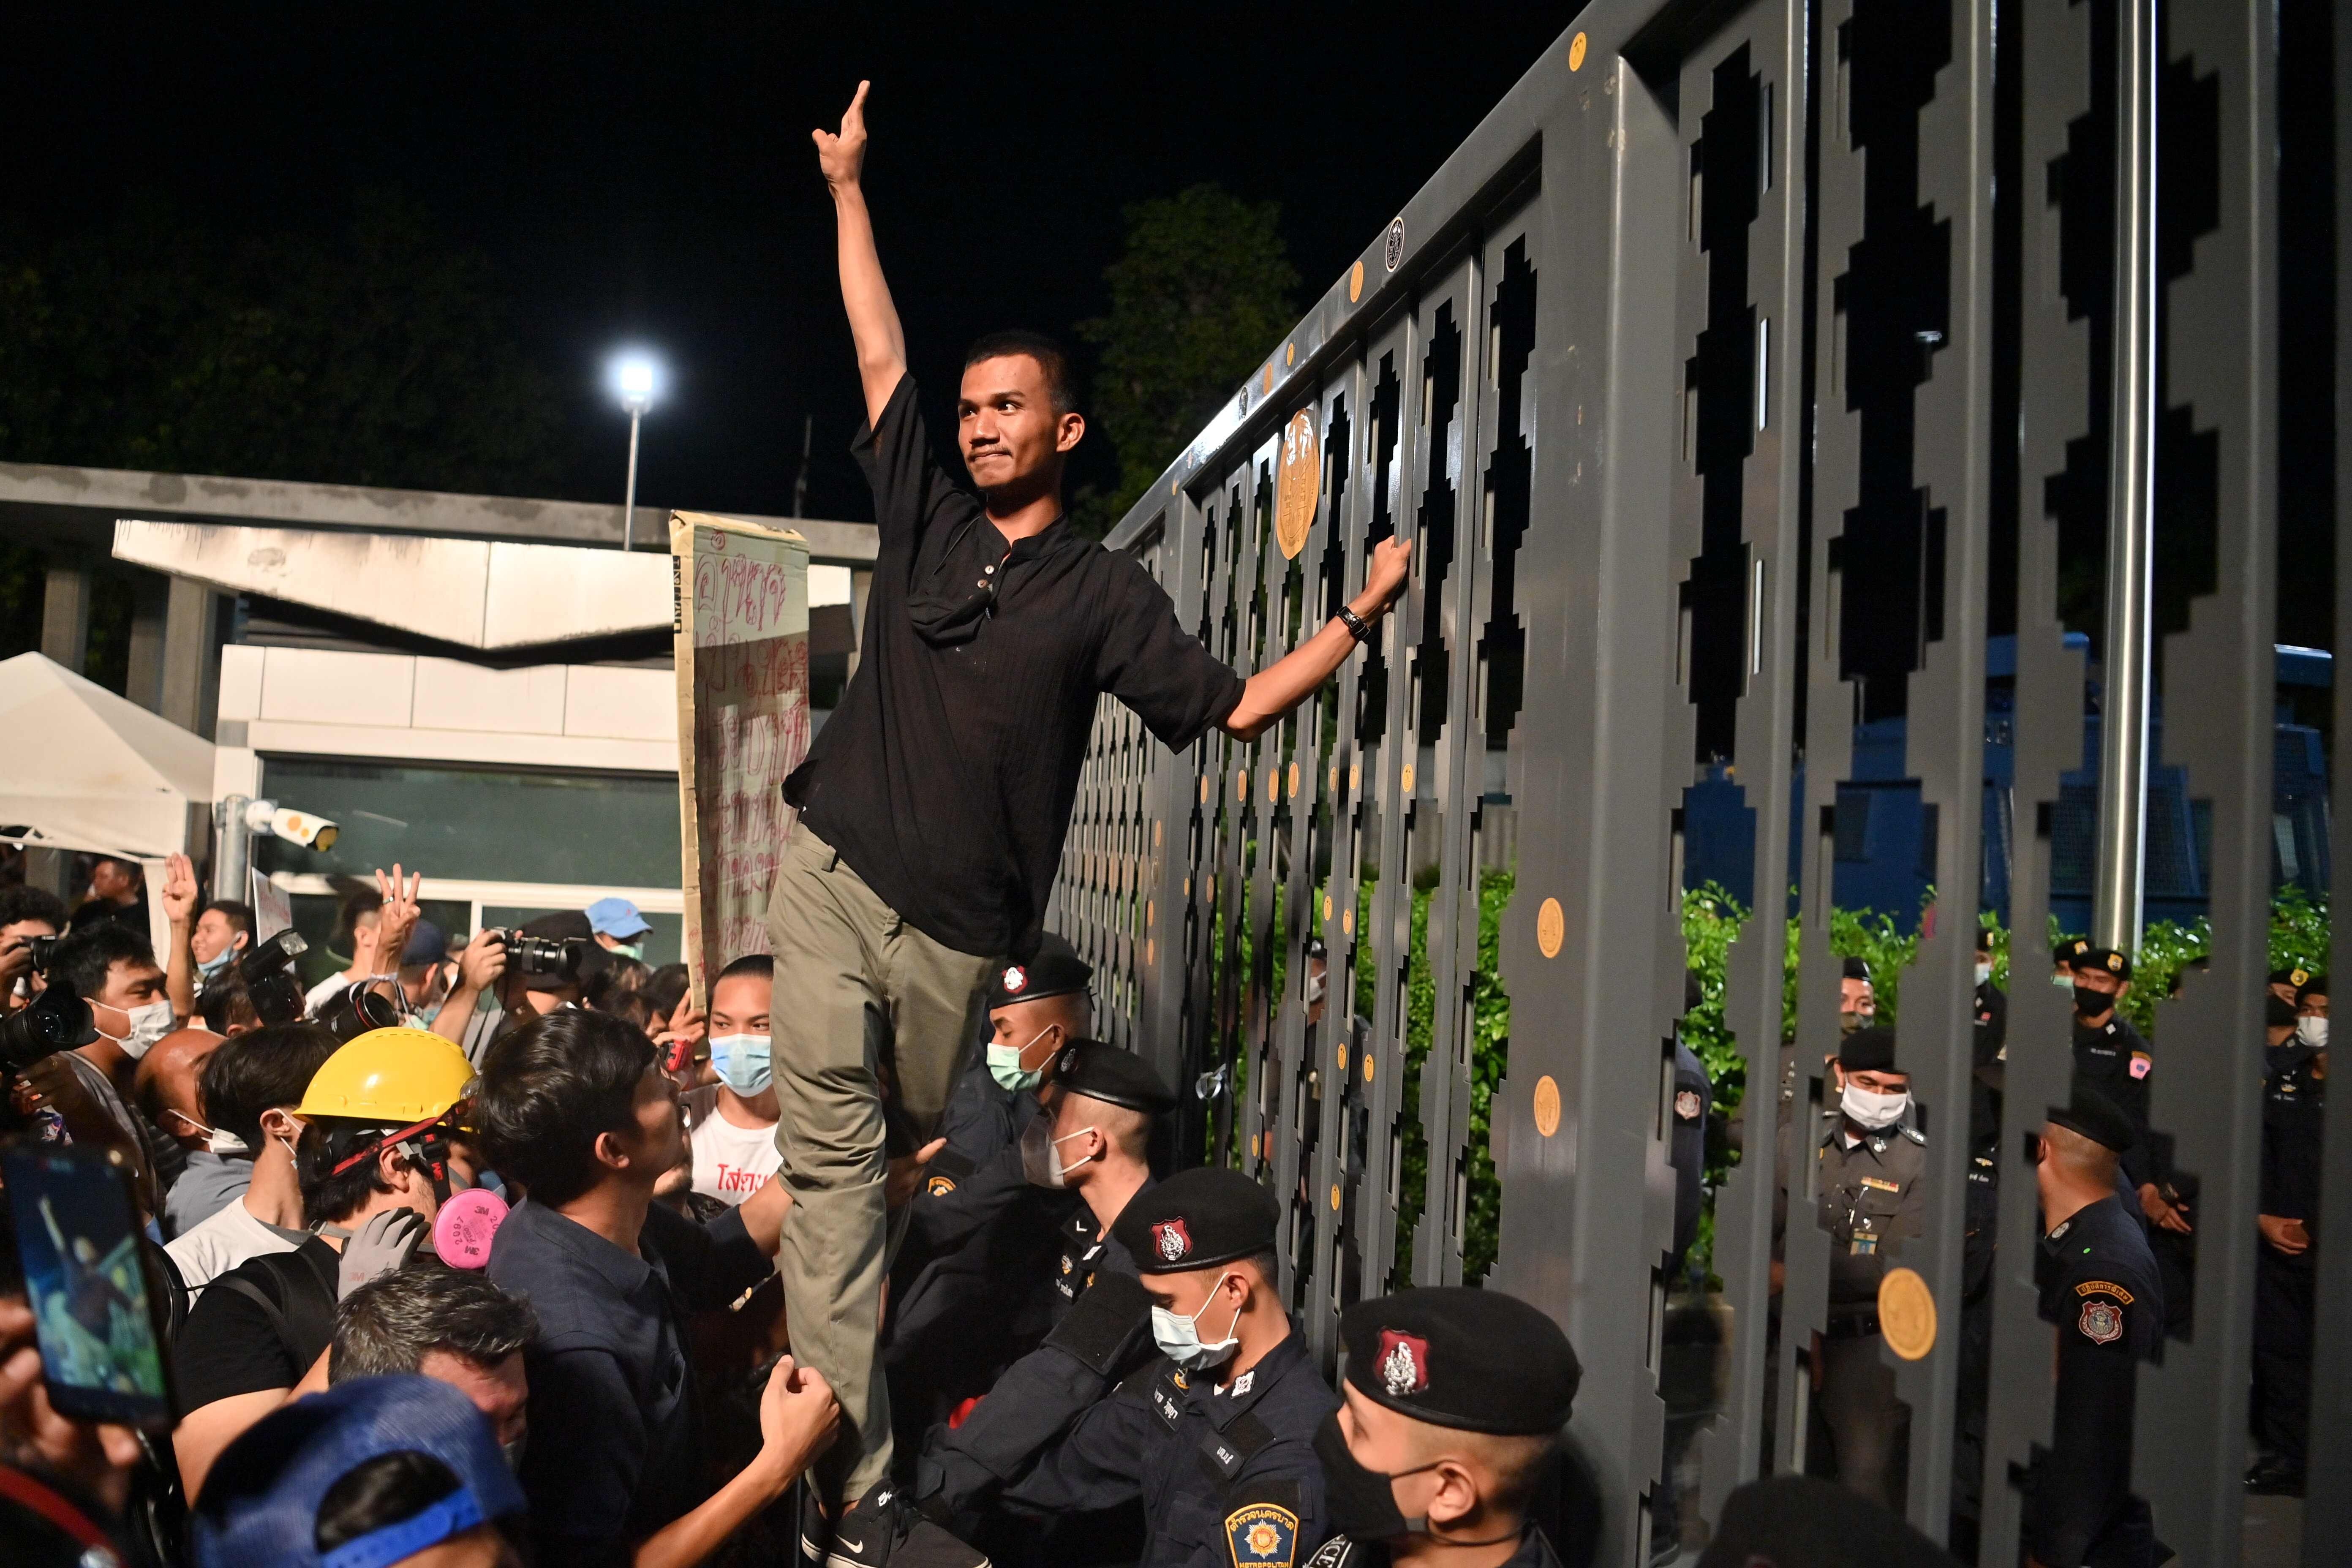 Pro-democracy activist Panupong “Mike” Jadnok makes a three-finger salute to anti-government protesters after placing a sticker outside the closed main gate of Thailand's parliament as lawmakers held a debate inside. Photo: AFP